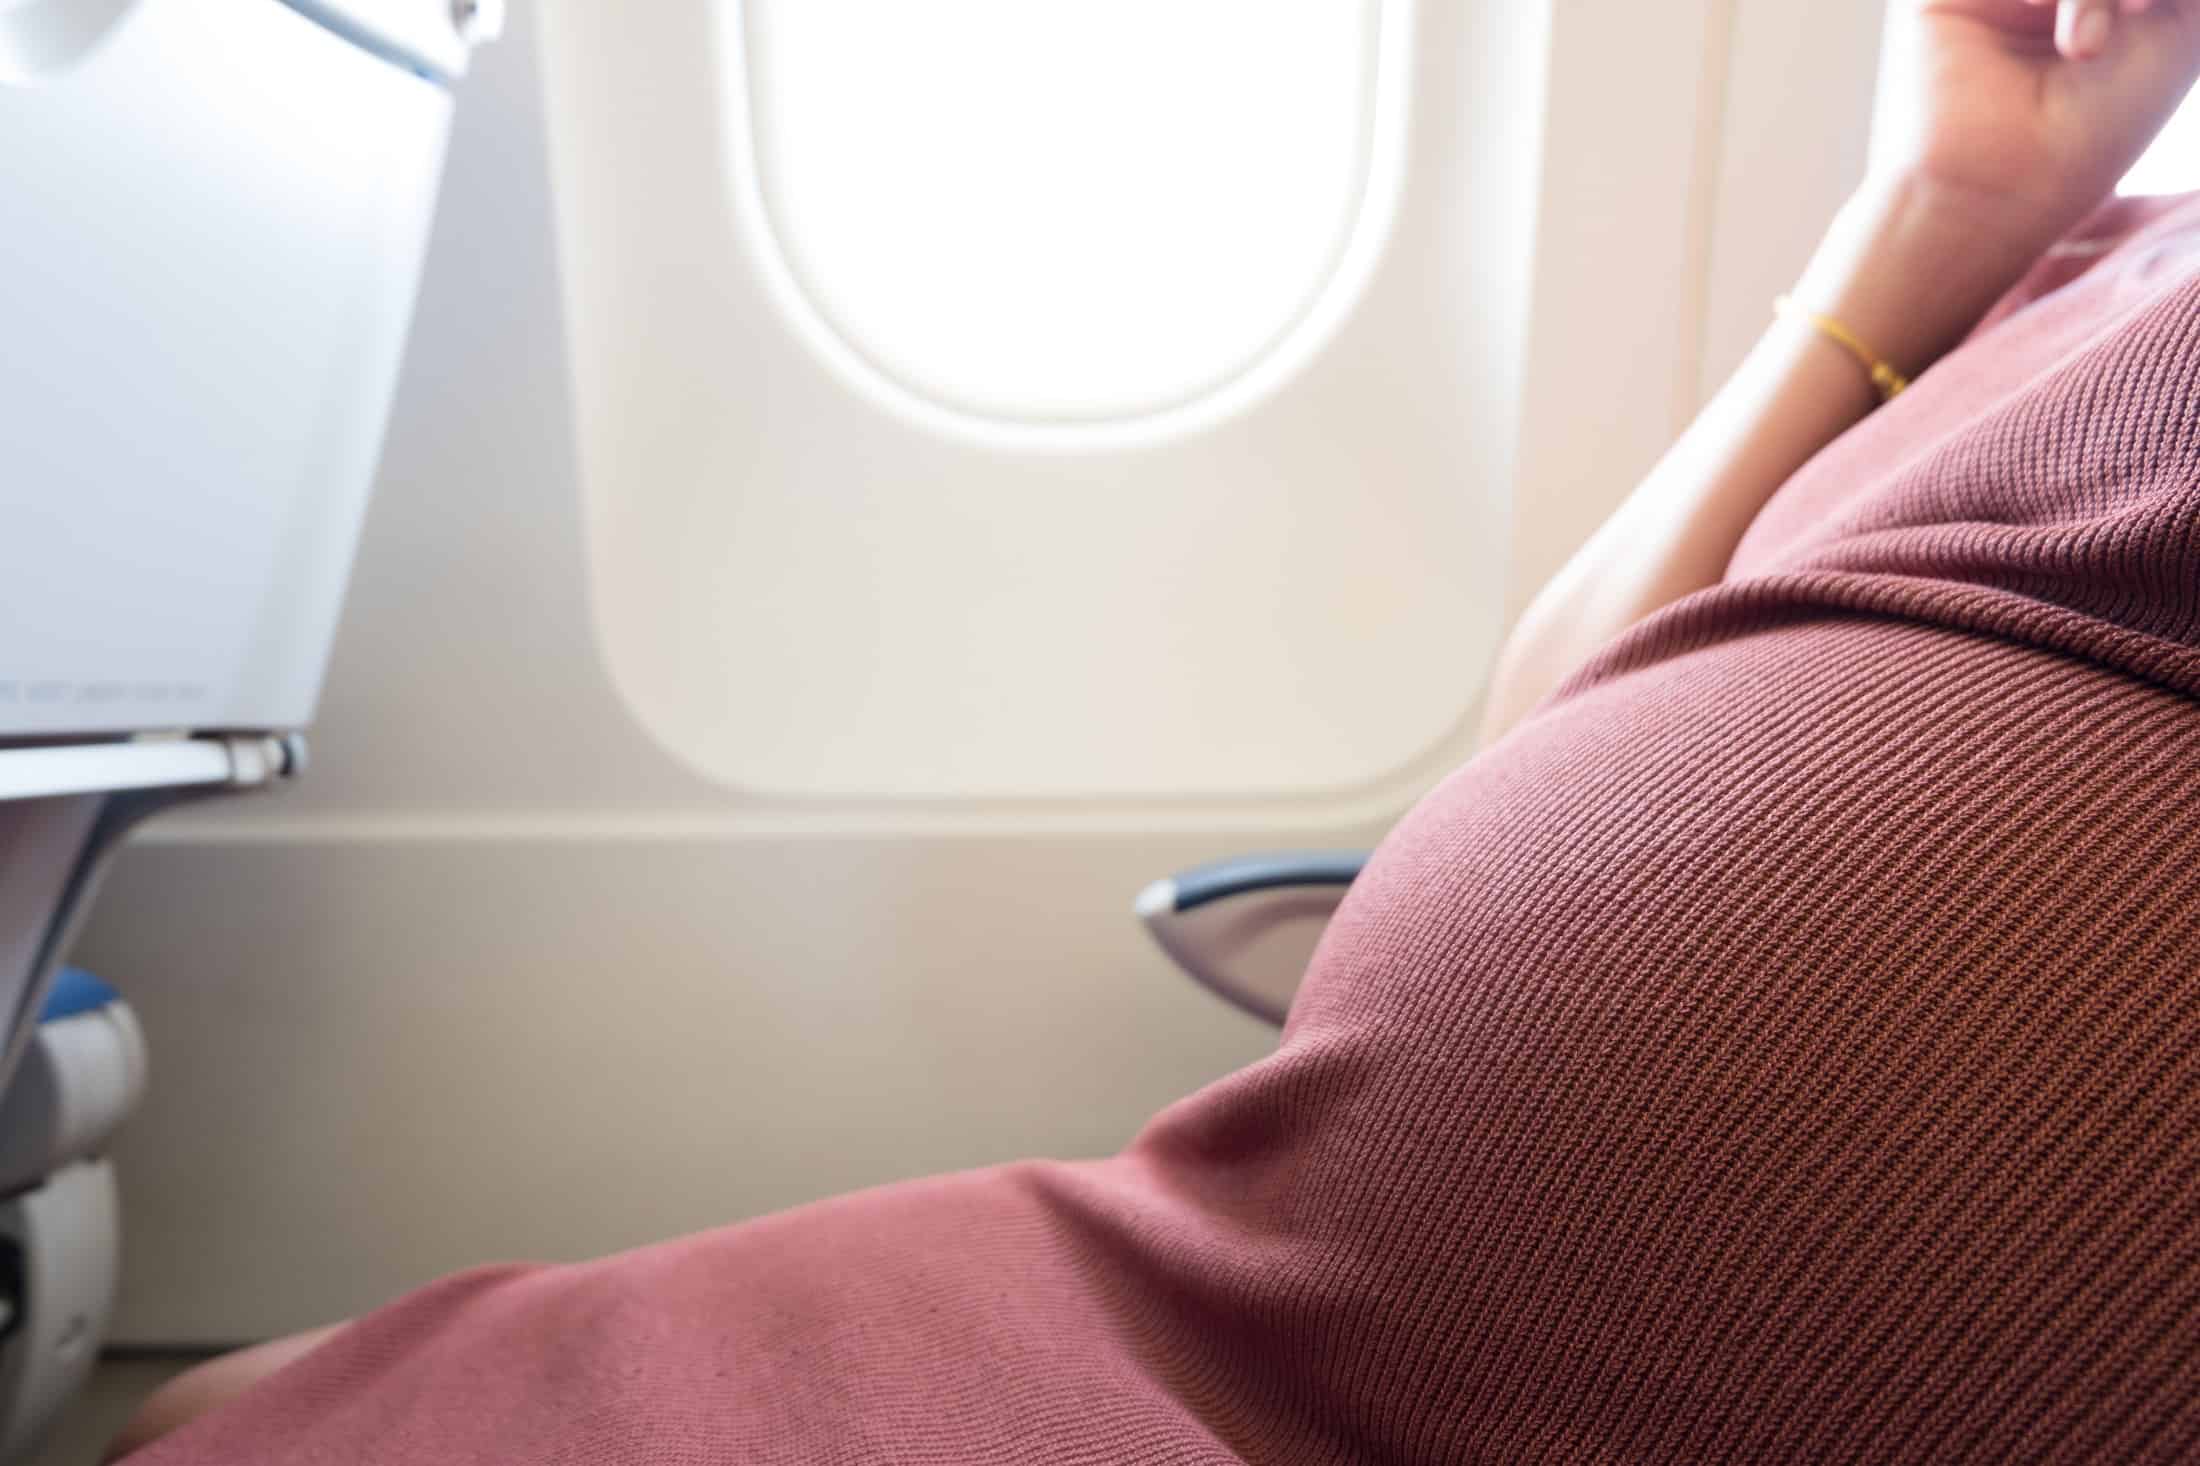 Is it safe to travel by air while pregnant?